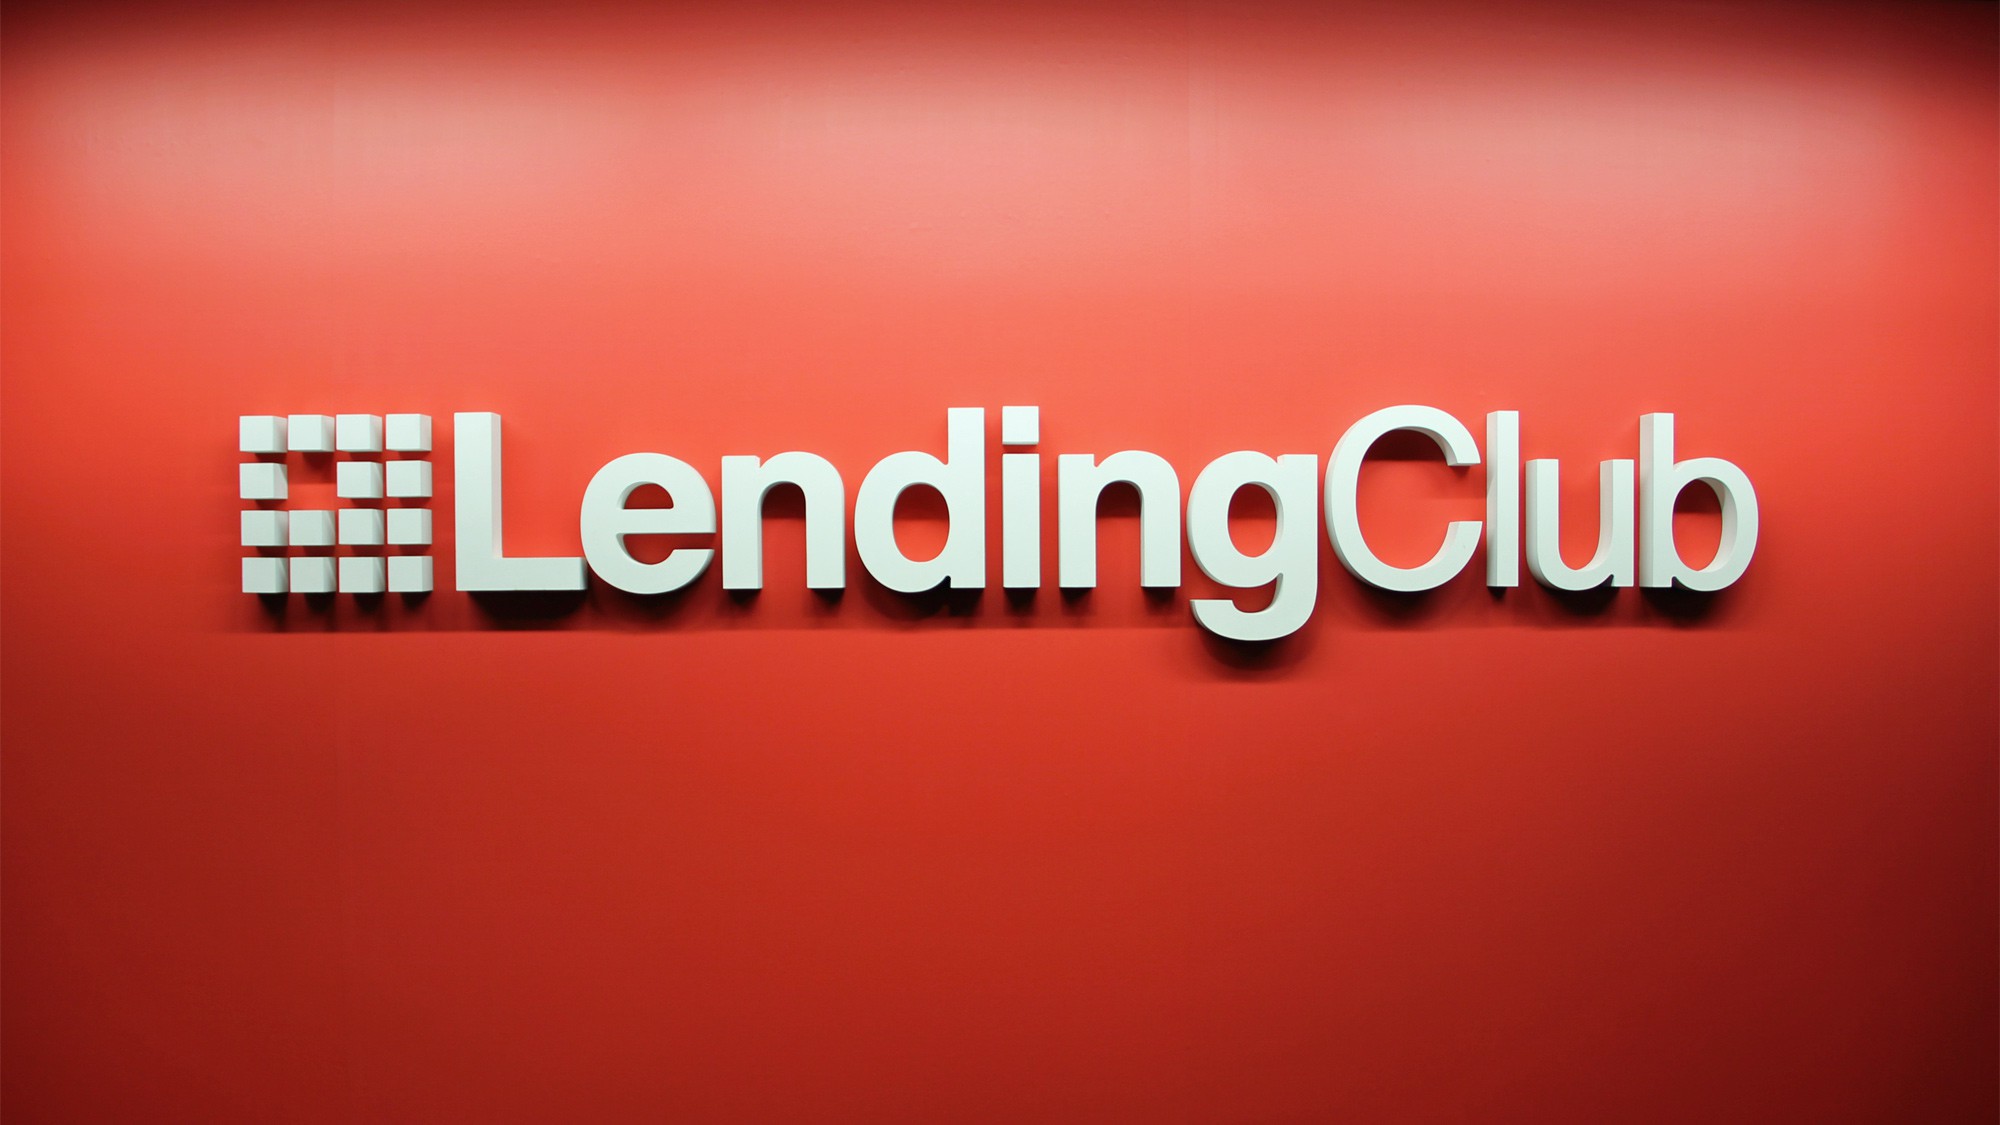 Is Lending Club A Good Investment Today? - Financial Samurai